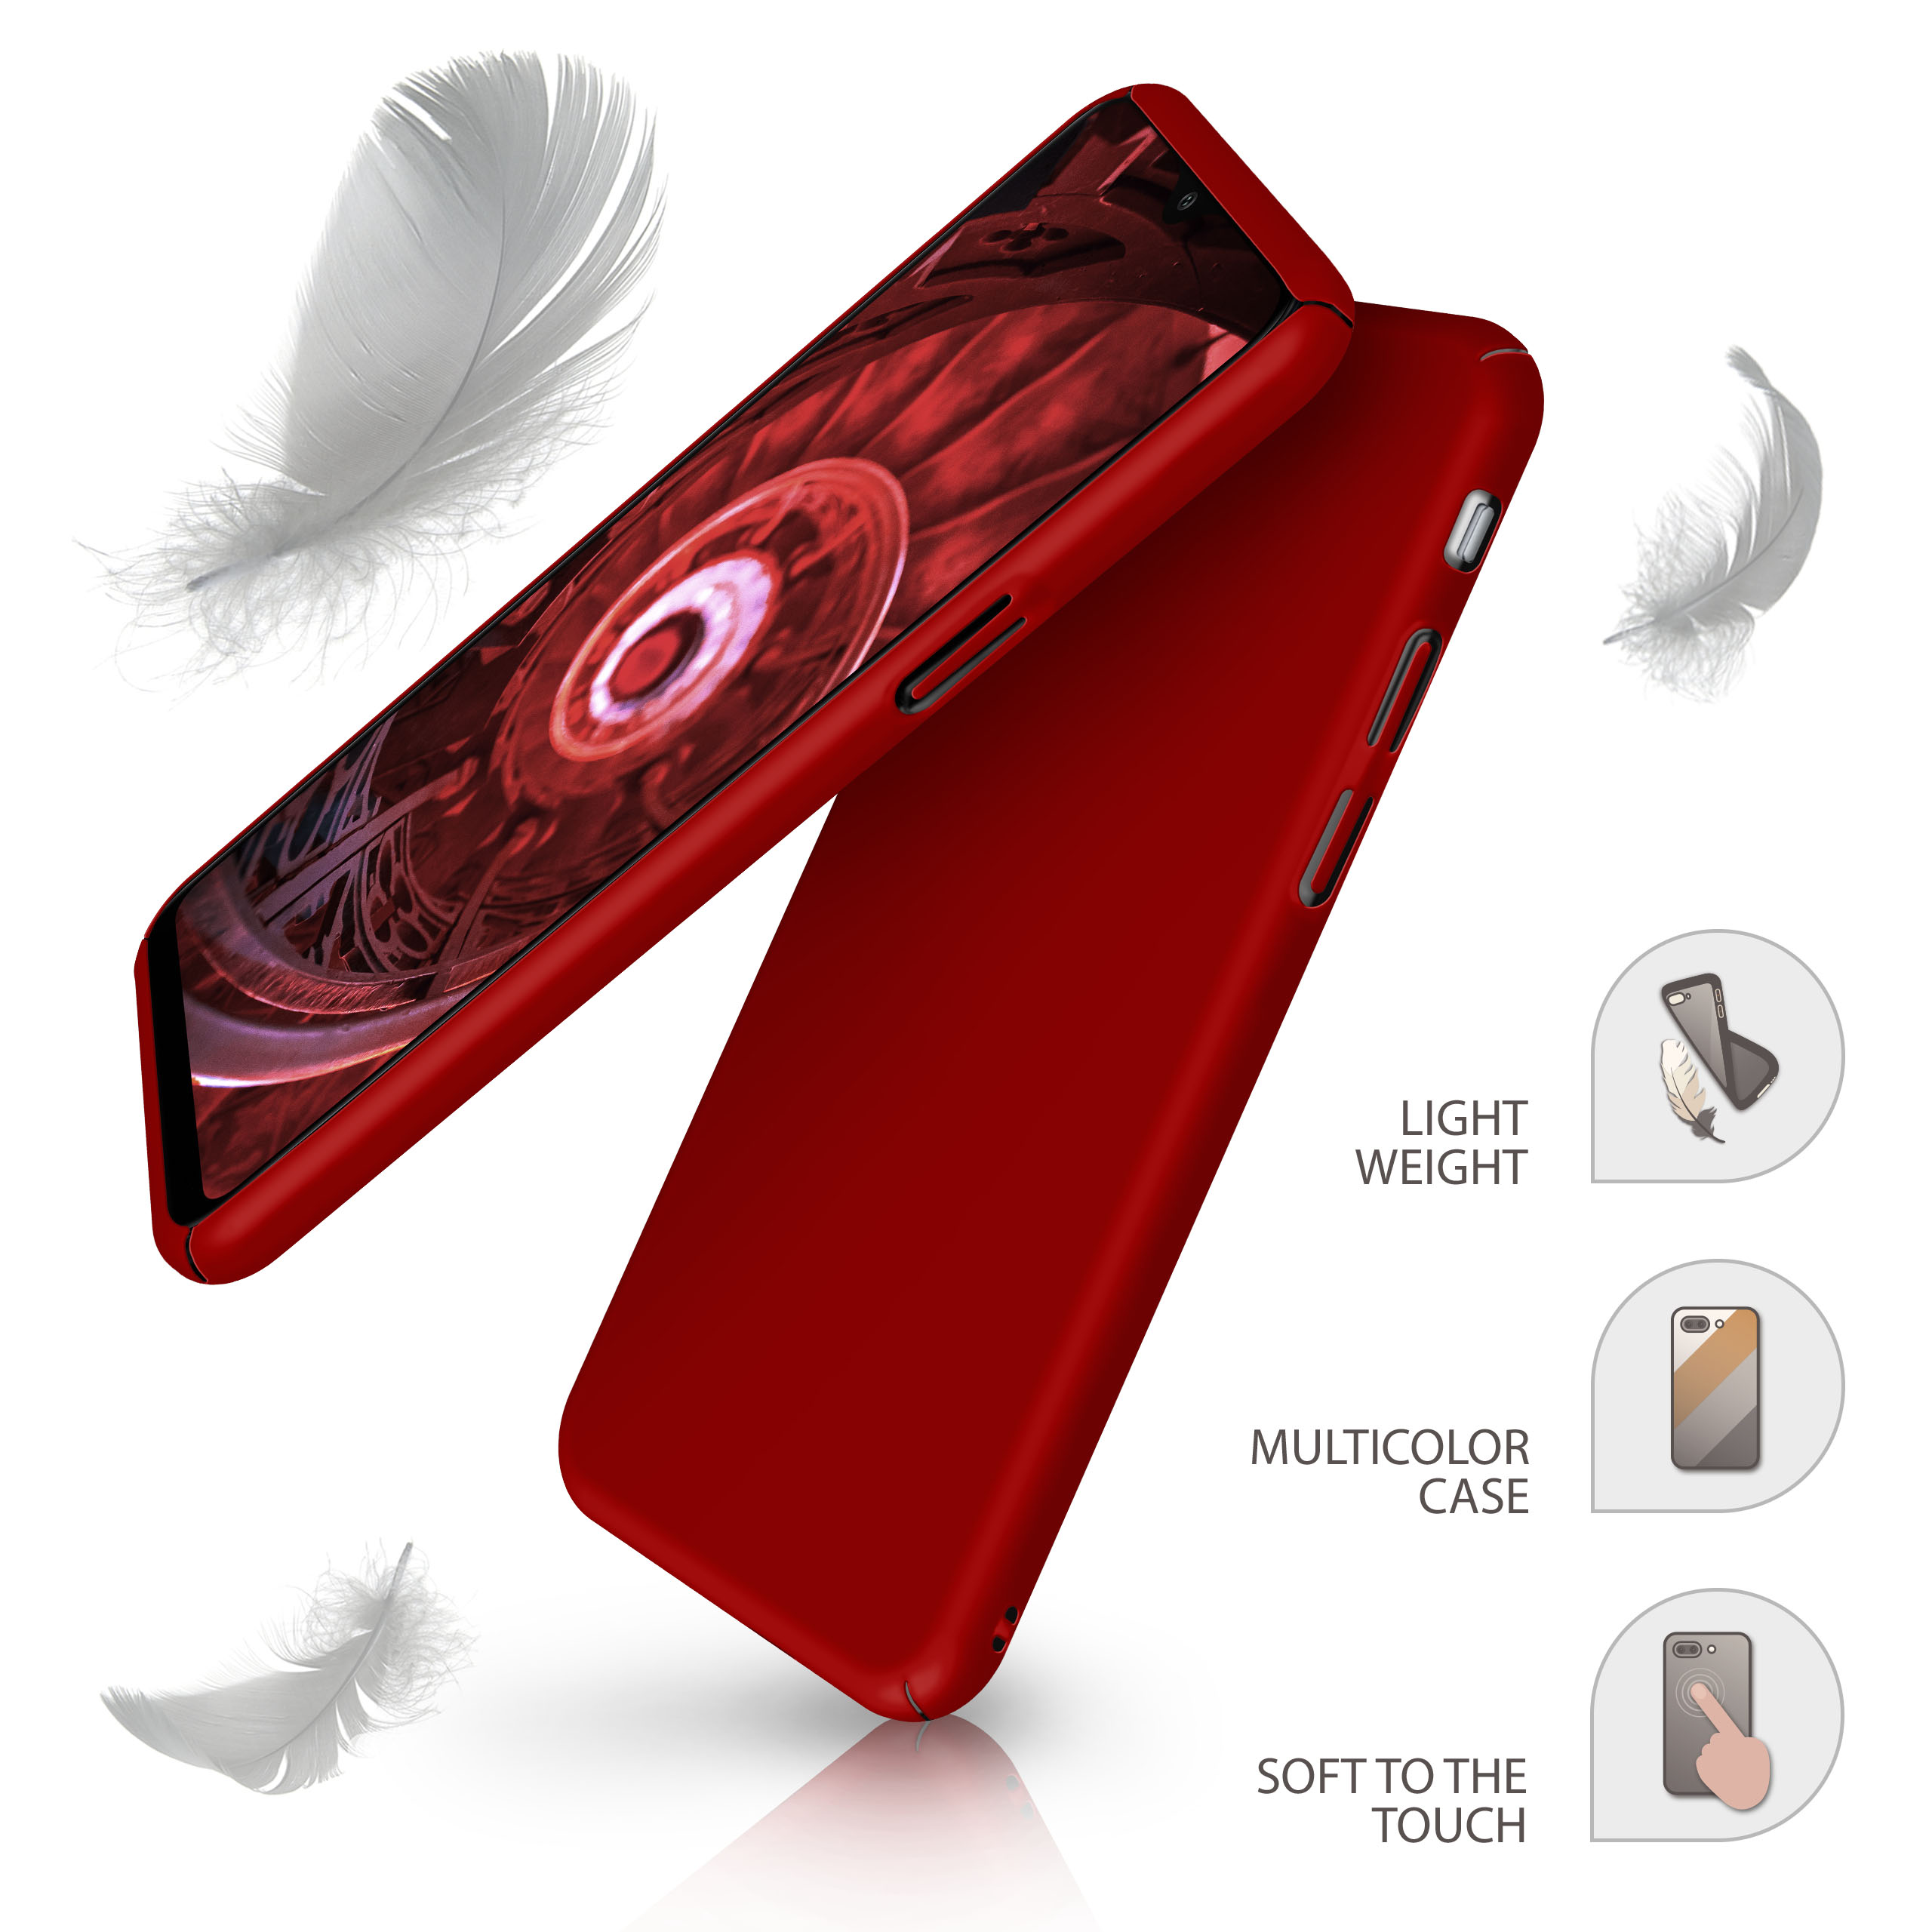 MOEX Alpha Case, Rot Note 7 Backcover, 7/ Xiaomi, Note / 7S, Redmi Pro